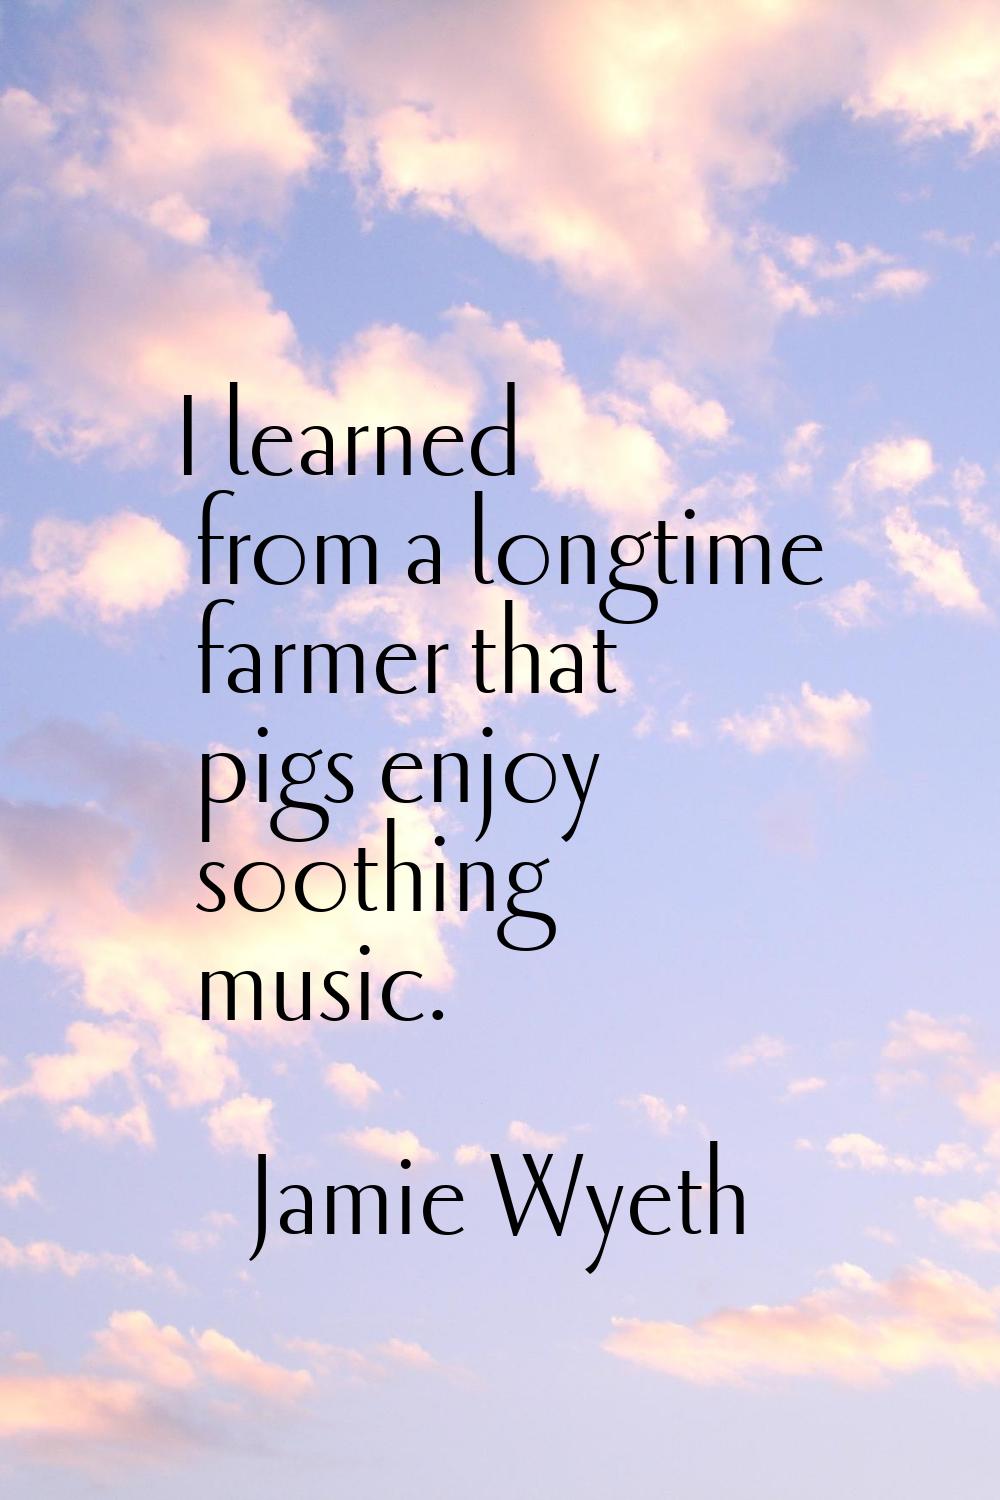 I learned from a longtime farmer that pigs enjoy soothing music.